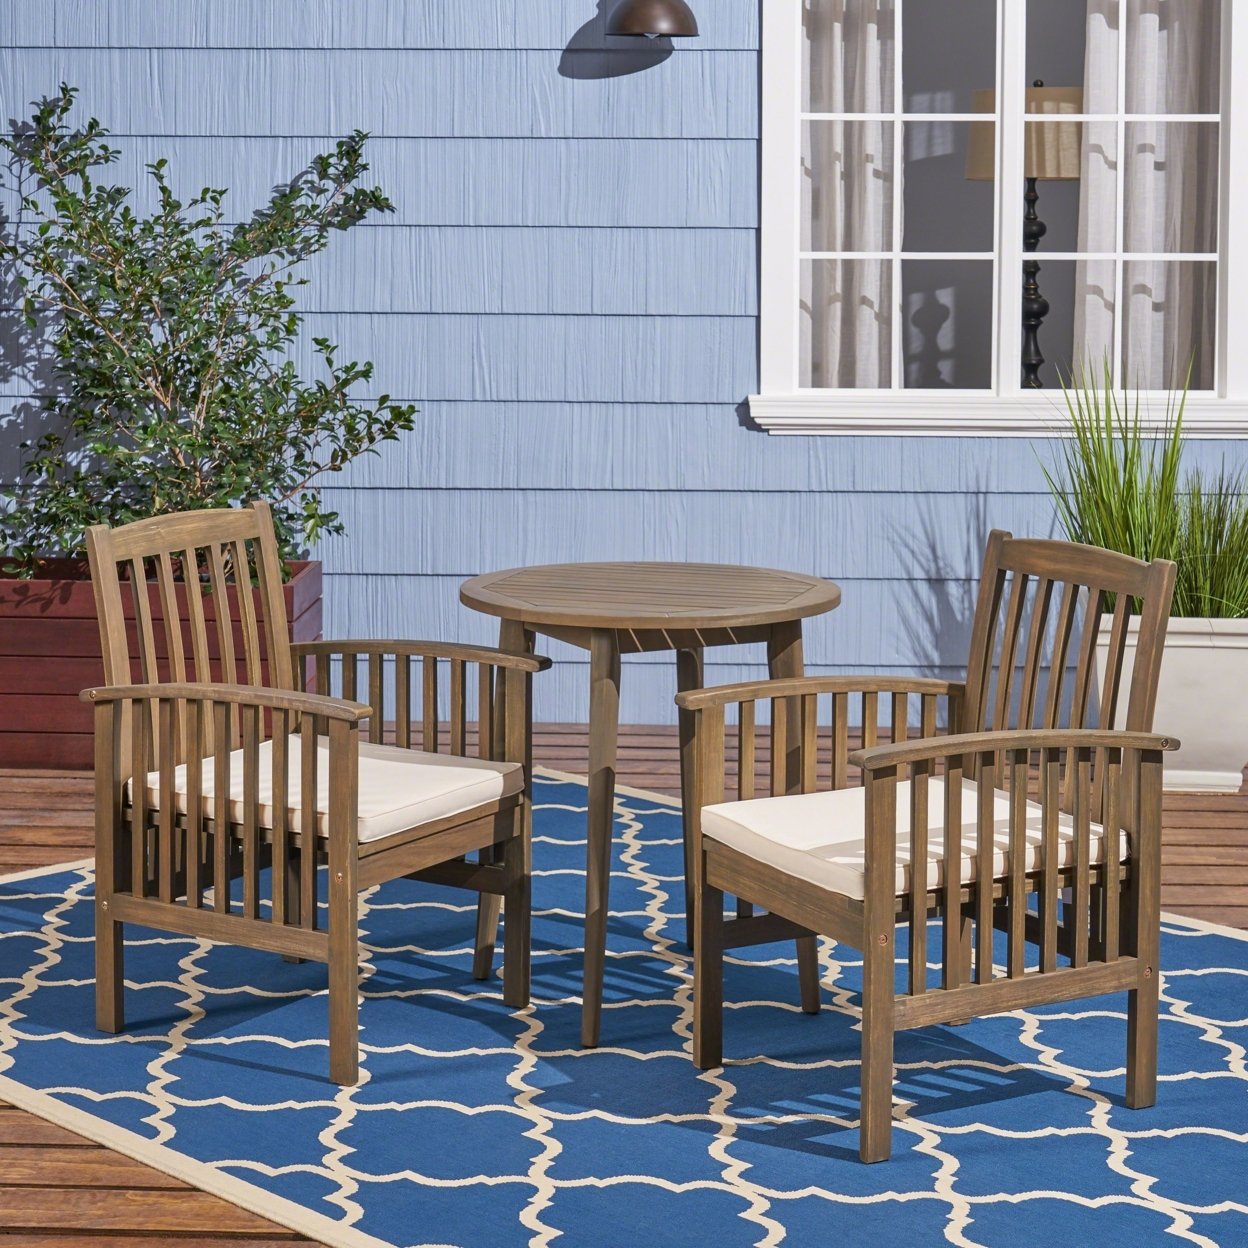 Phoenix Outdoor Acacia 2-Seater Bistro Set With Cushions And 28 Round Table With Straight Legs - Gray Finish + Dark Gray